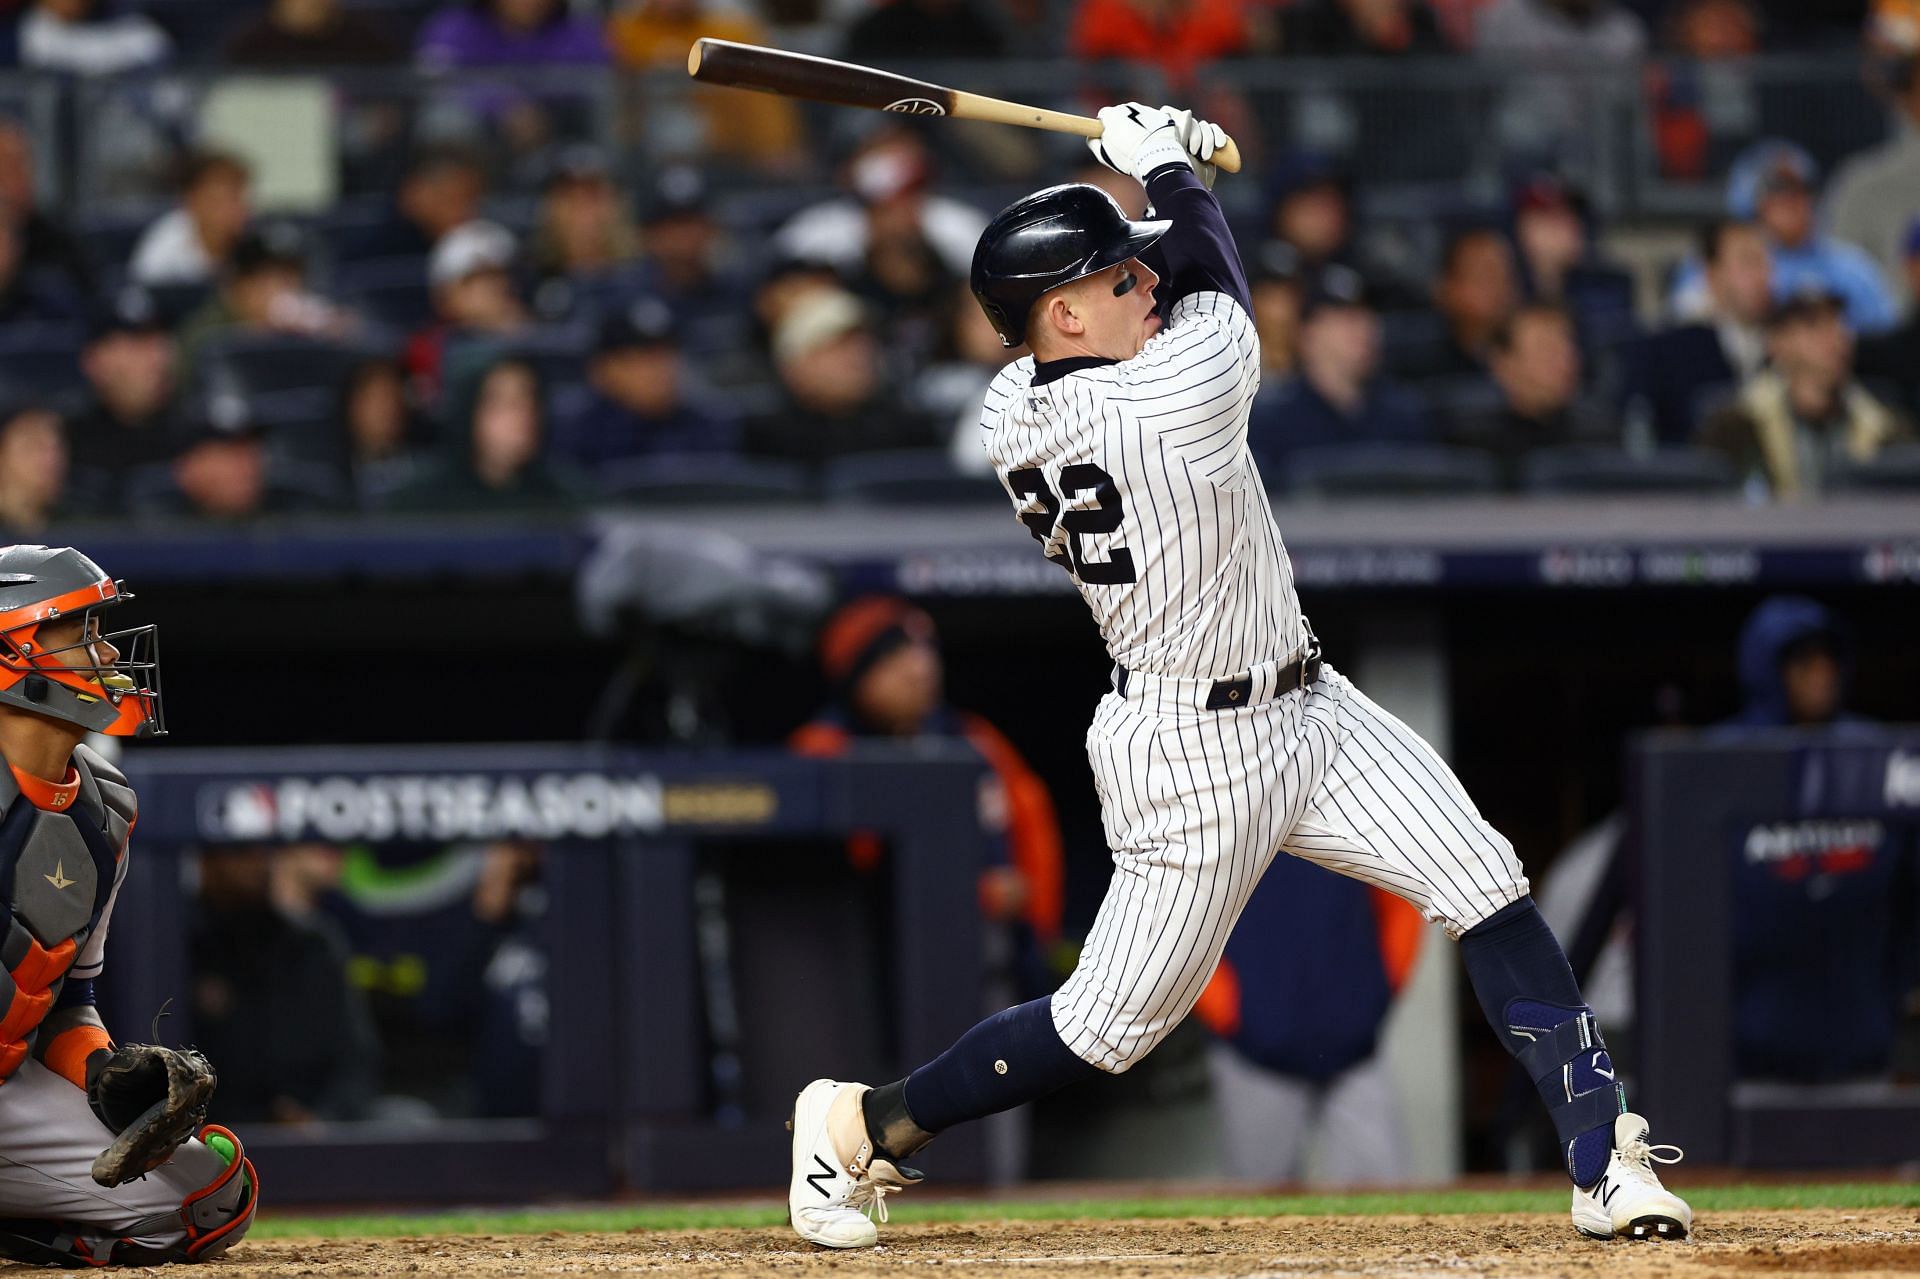 Harrison Bader of the New York Yankees hits a solo home run during the sixth inning against the Houston Astros at Yankee Stadium on October 23, 2022. (Photo by Elsa/Getty Images)